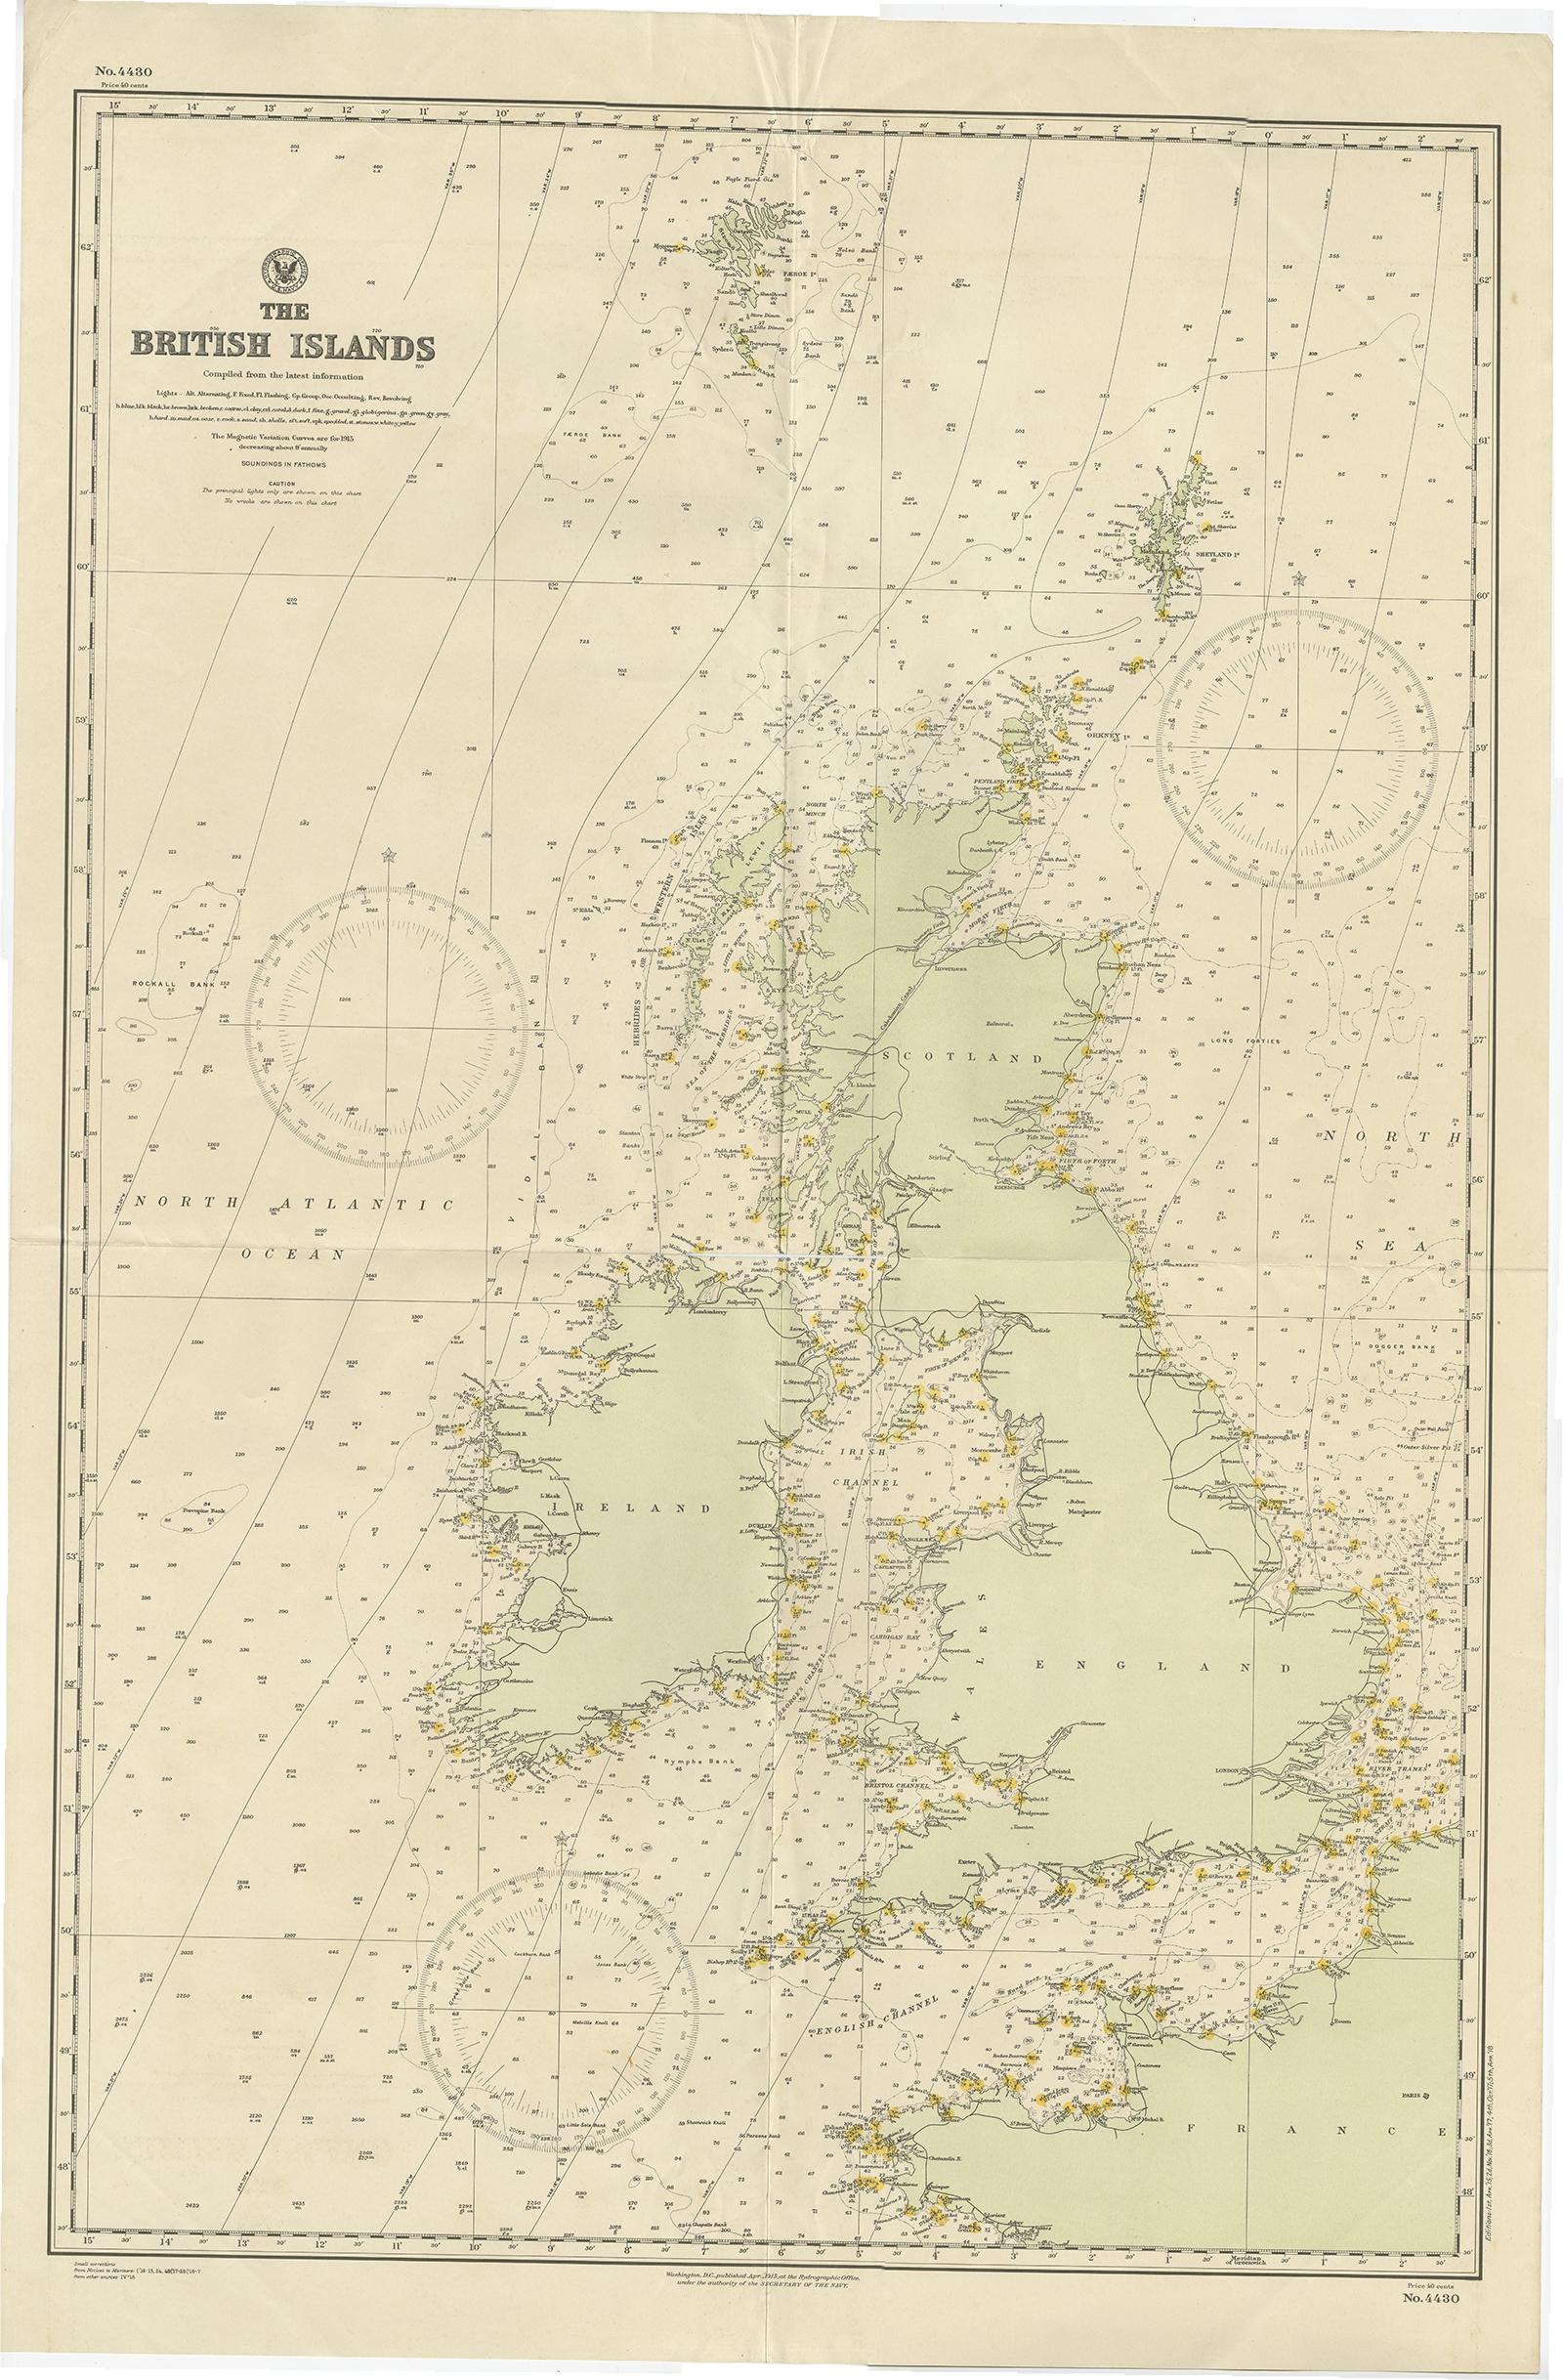 Antique map titled 'The British Islands'. 

Large sea chart of the British Islands. It shows Ireland, Scotland, England, the Shetland Islands and part of France.

The antique sea chart titled 'The British Islands' is a significant cartographic work